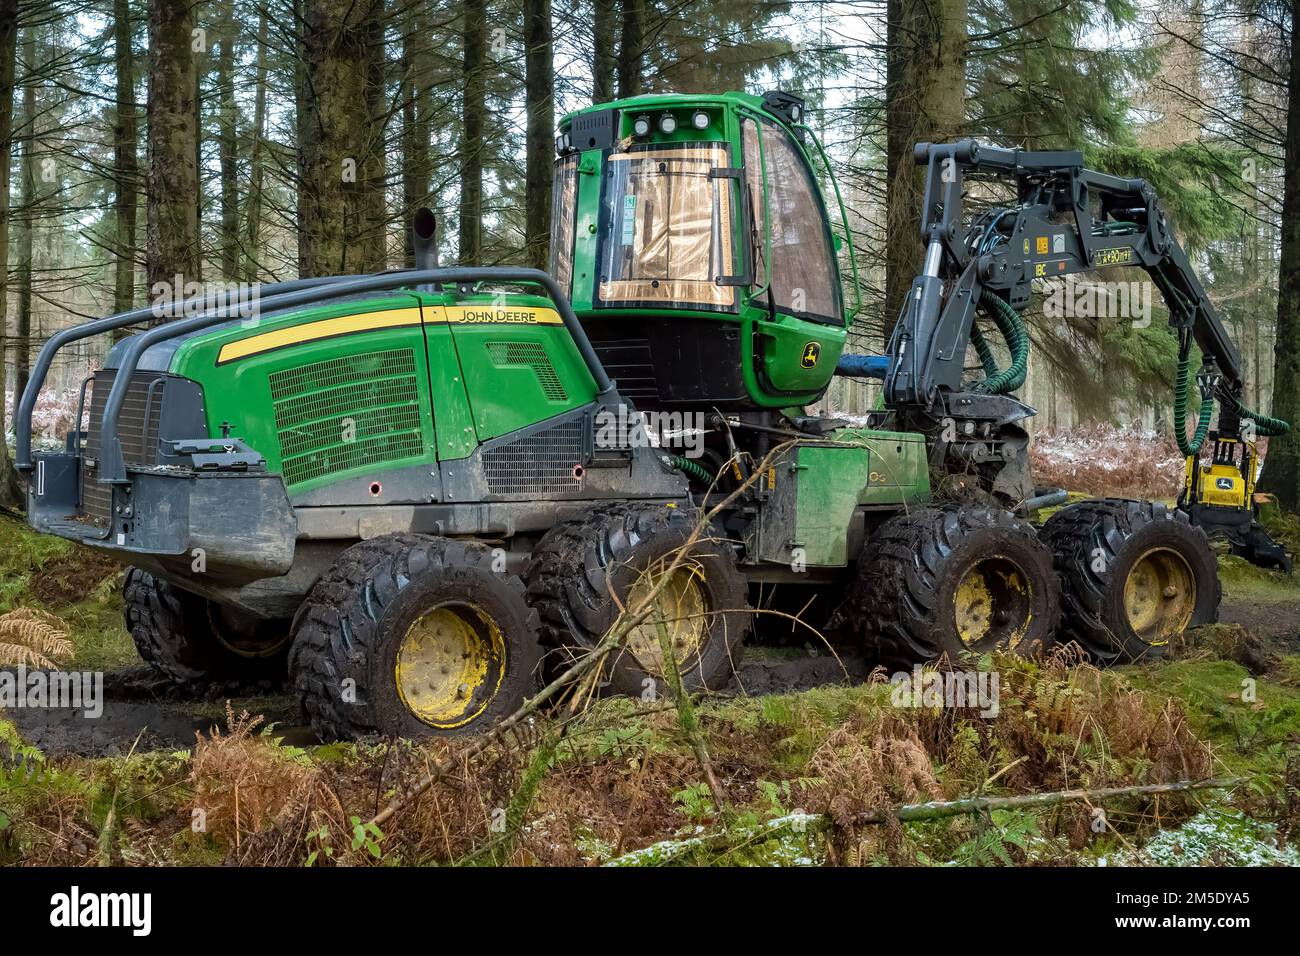 An eight-wheeled logging machine parked for the Christmas break in Beacon Wood, Penrith, Cumbria, UK Stock Photo